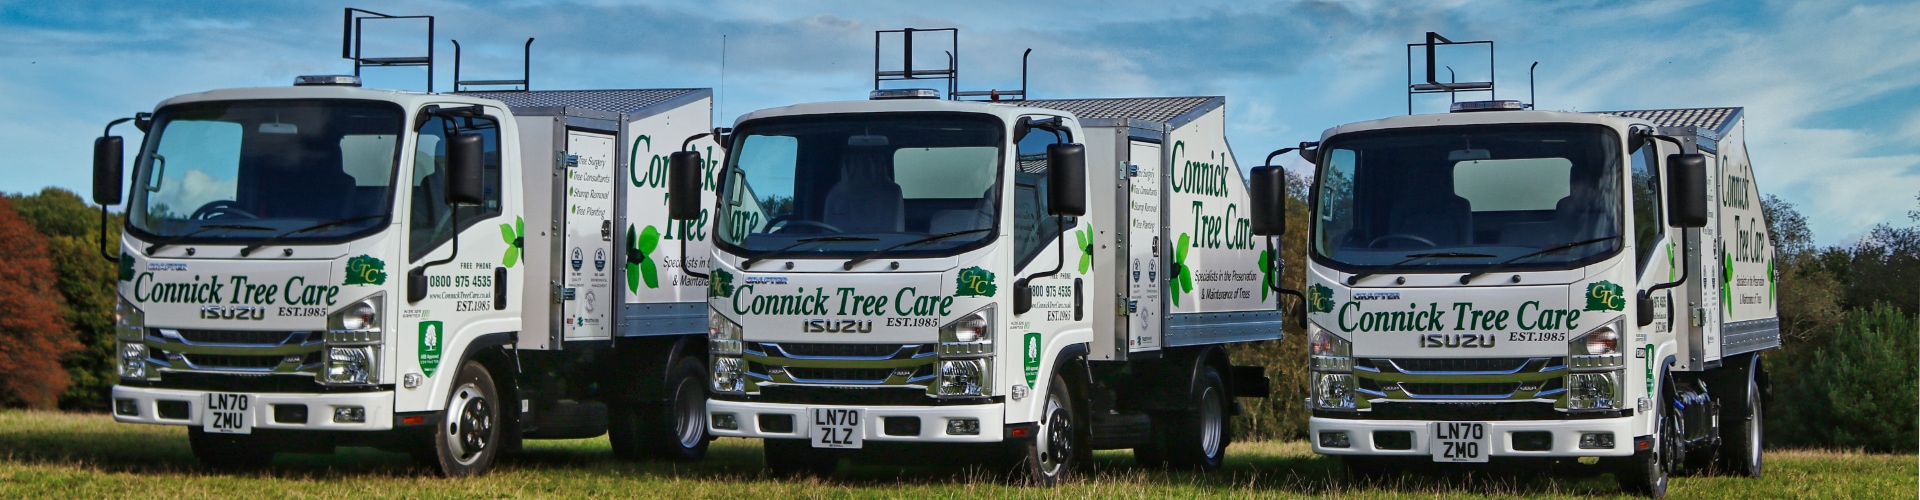 Banner showing three arboriculture lorries with Connick Tree Care branding